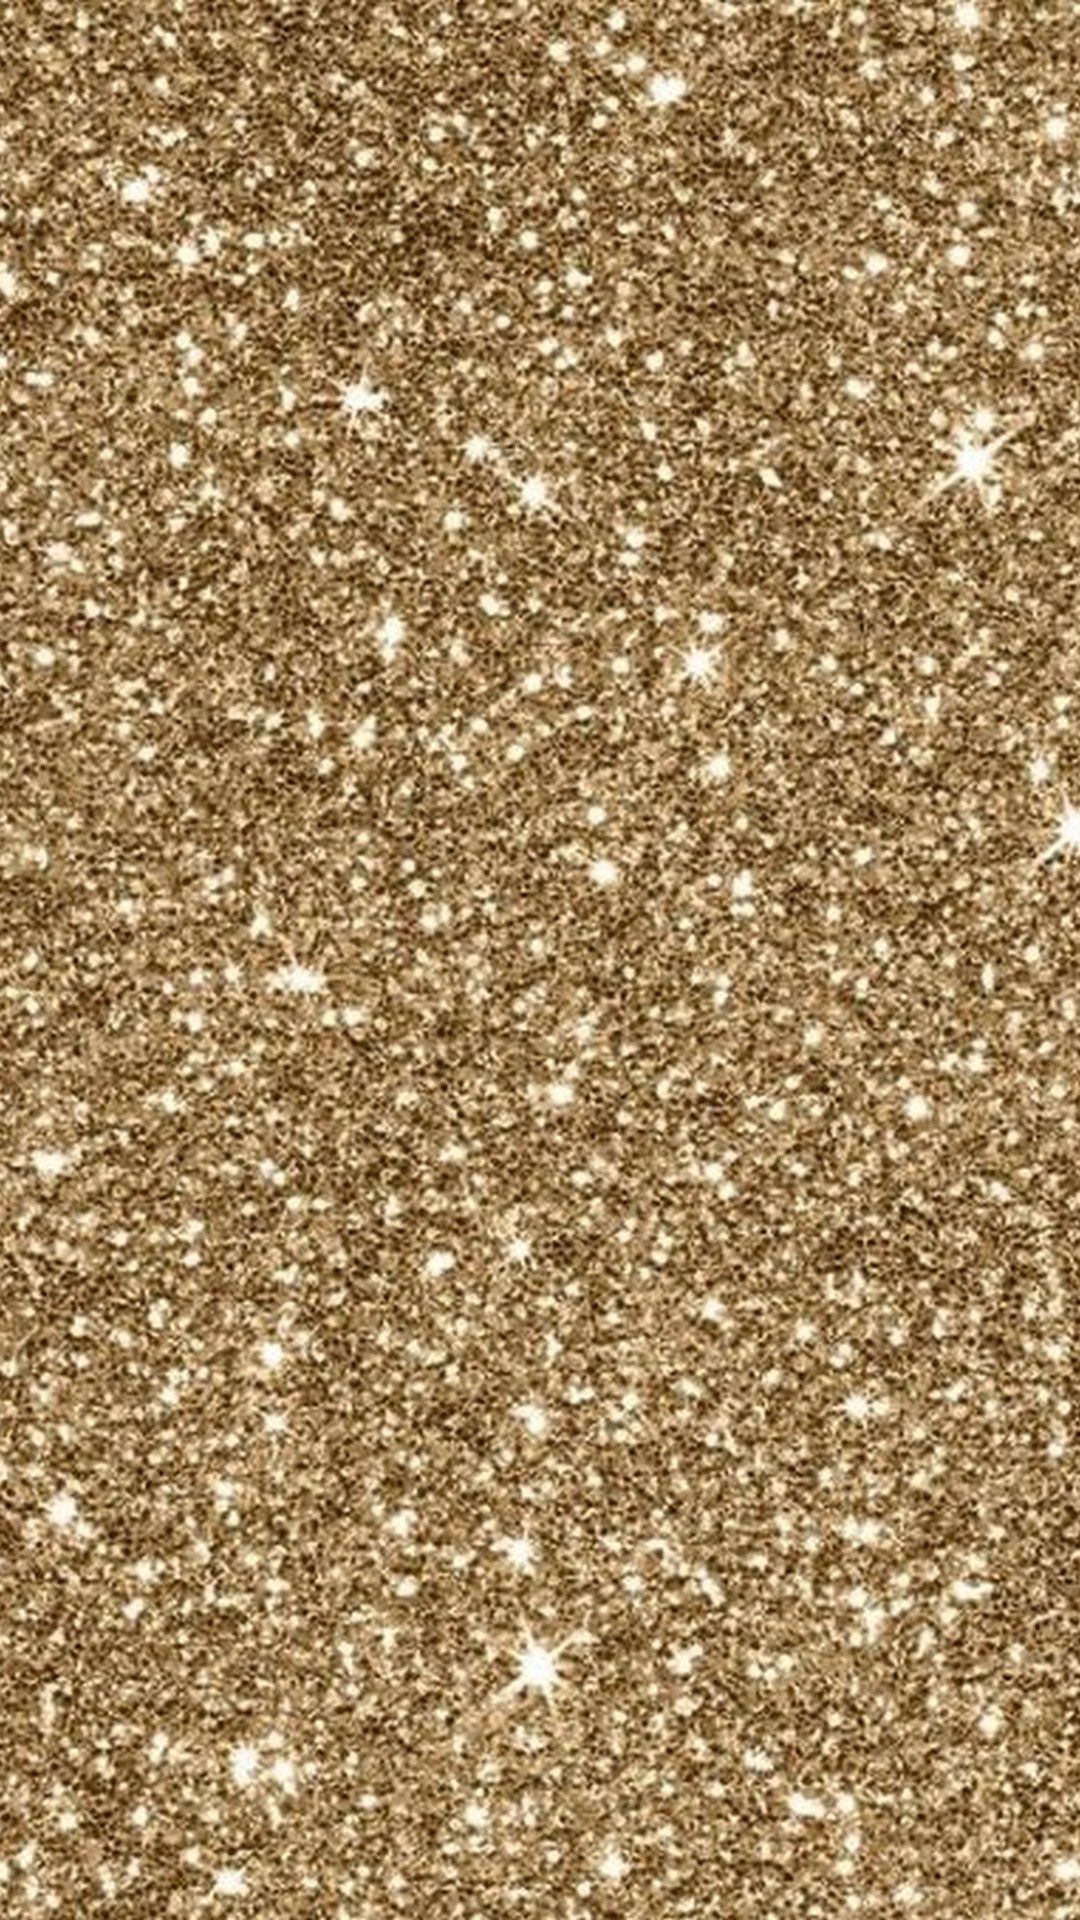 Gold Glitter Wallpaper For Android Android Wallpaper. Papel de parede gliter, Papel de parede brilhante, Papel de parede de ouro